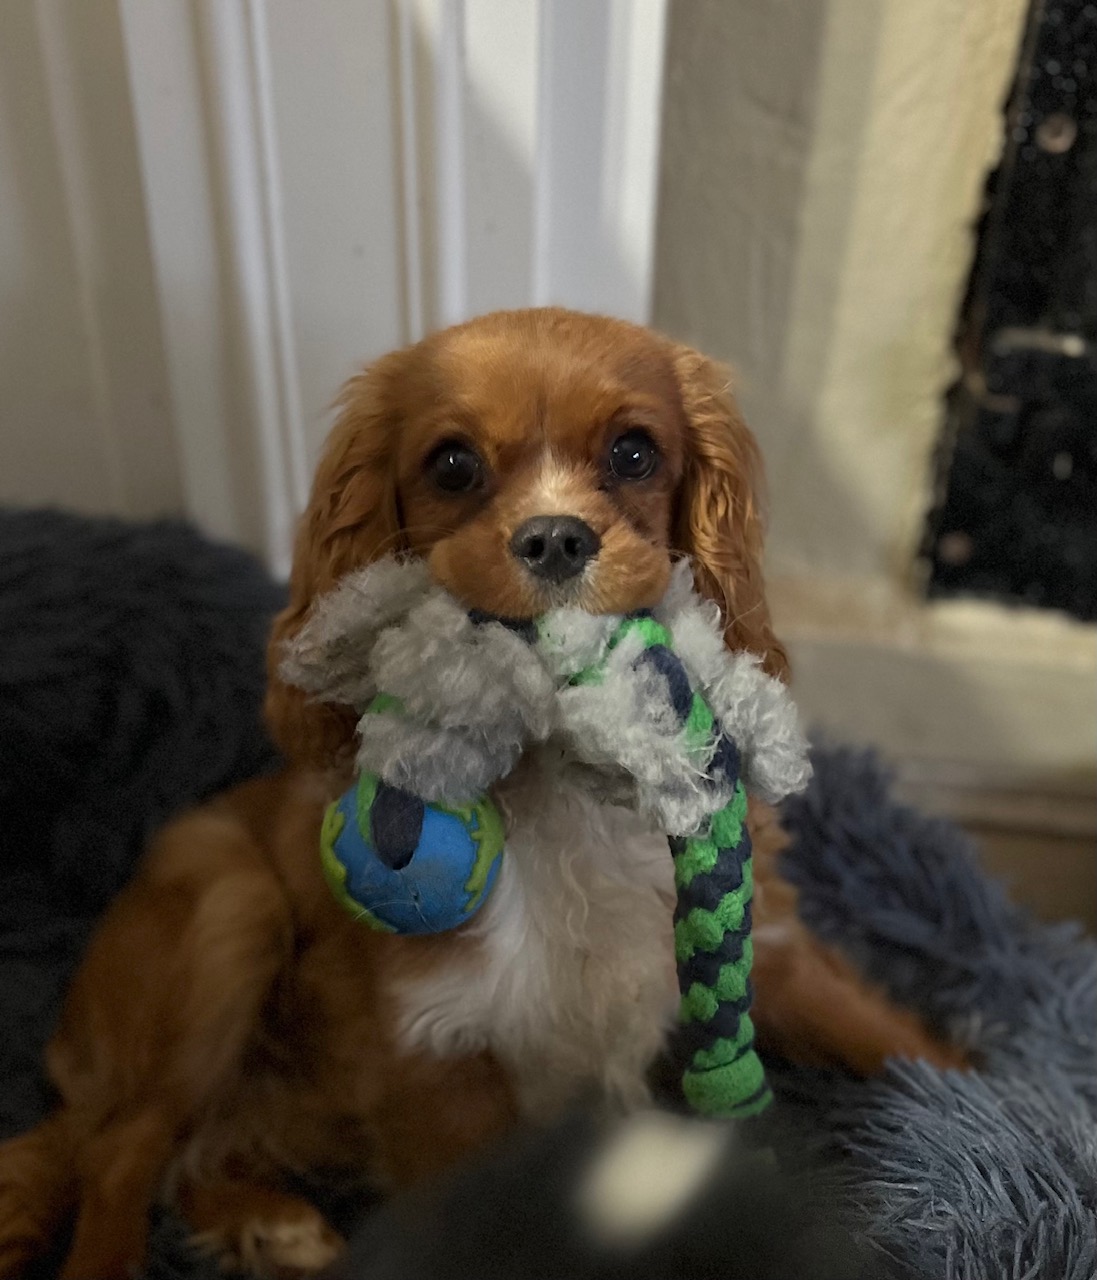 Elfore Cavalier King Charles Spaniel Puppies: Peanut, Millii's Son, the Resilient Pup Destined for Agility Training.